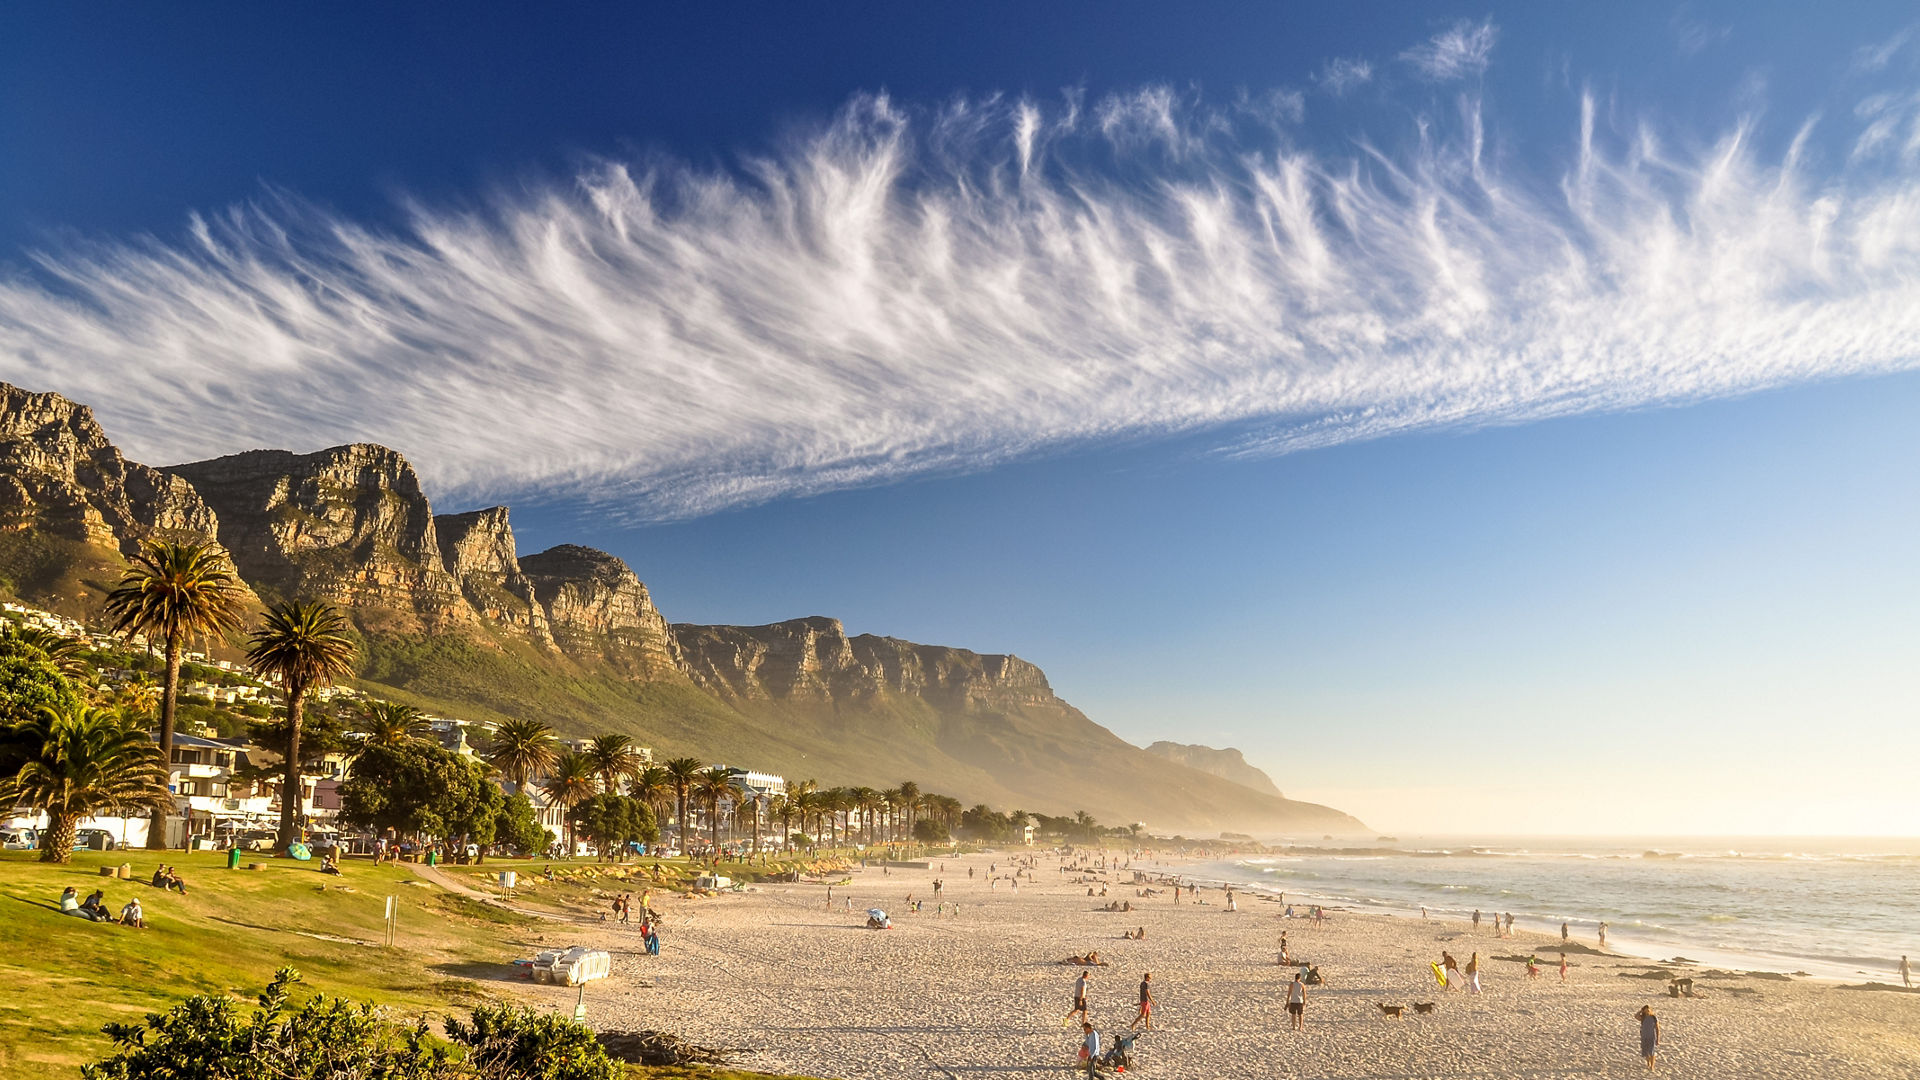 Stunning evening photo of Camps Bay, an affluent suburb of Cape Town, Western Cape, South Africa. With its white beach, Camps Bay attracts a large number of foreign visitors as well as South Africans., Stunning evening photo of Camps Bay, an affluent suburb of Cape 